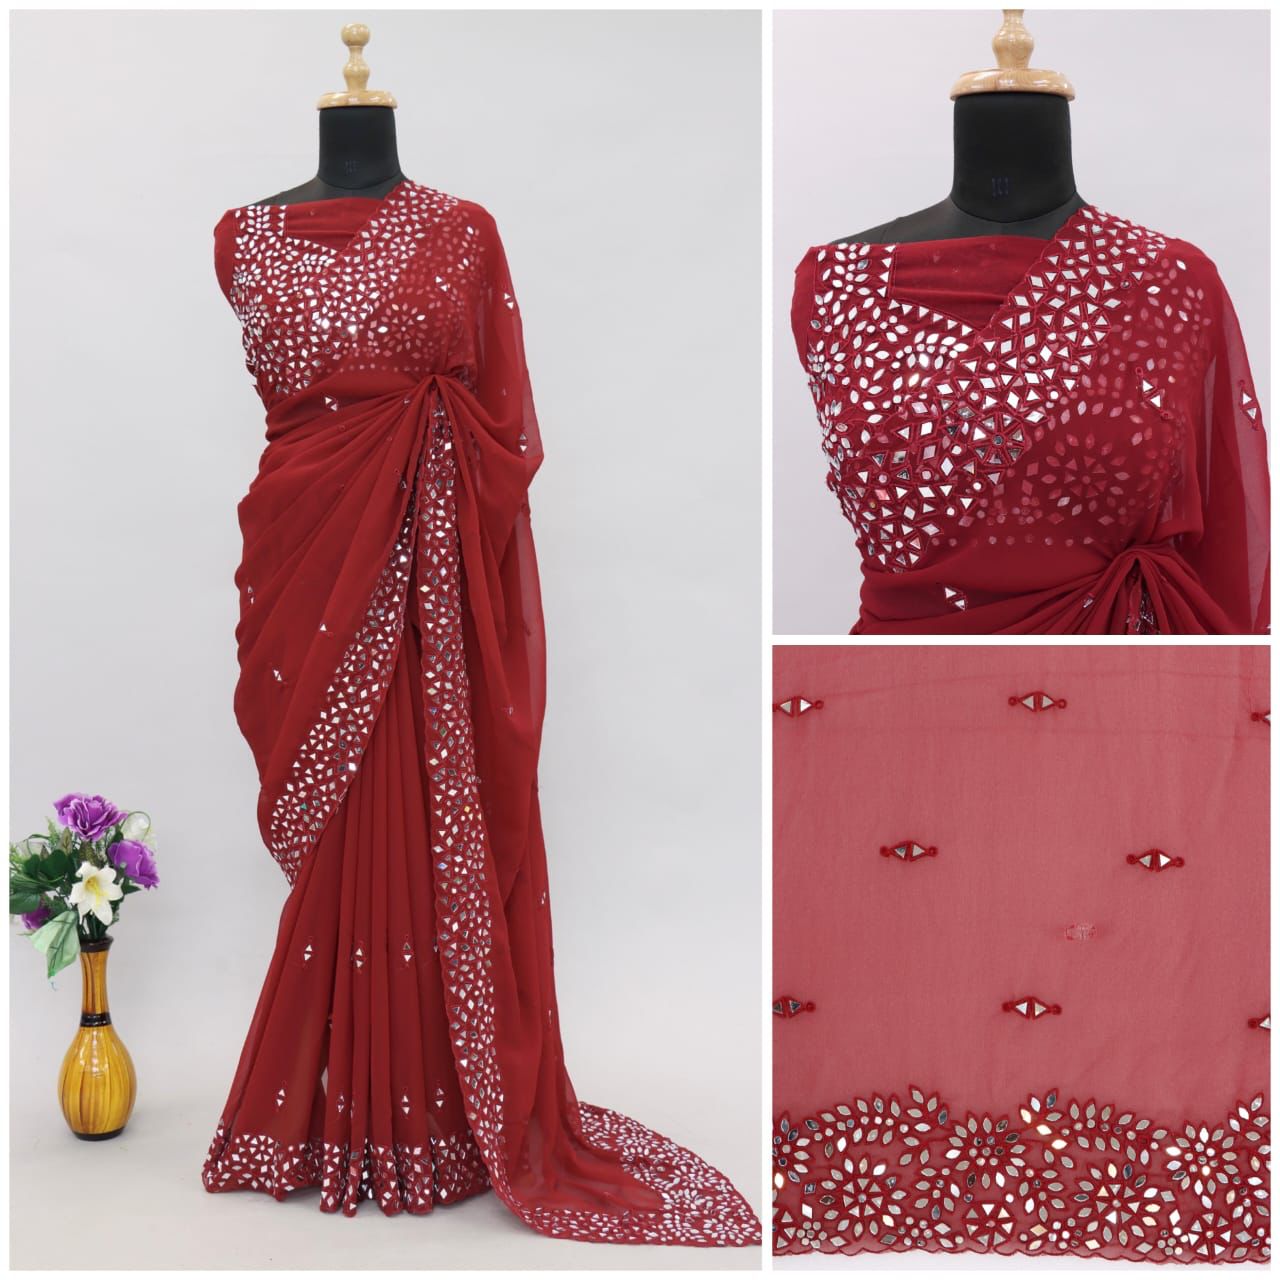 Contemporary Sarees on trend now!